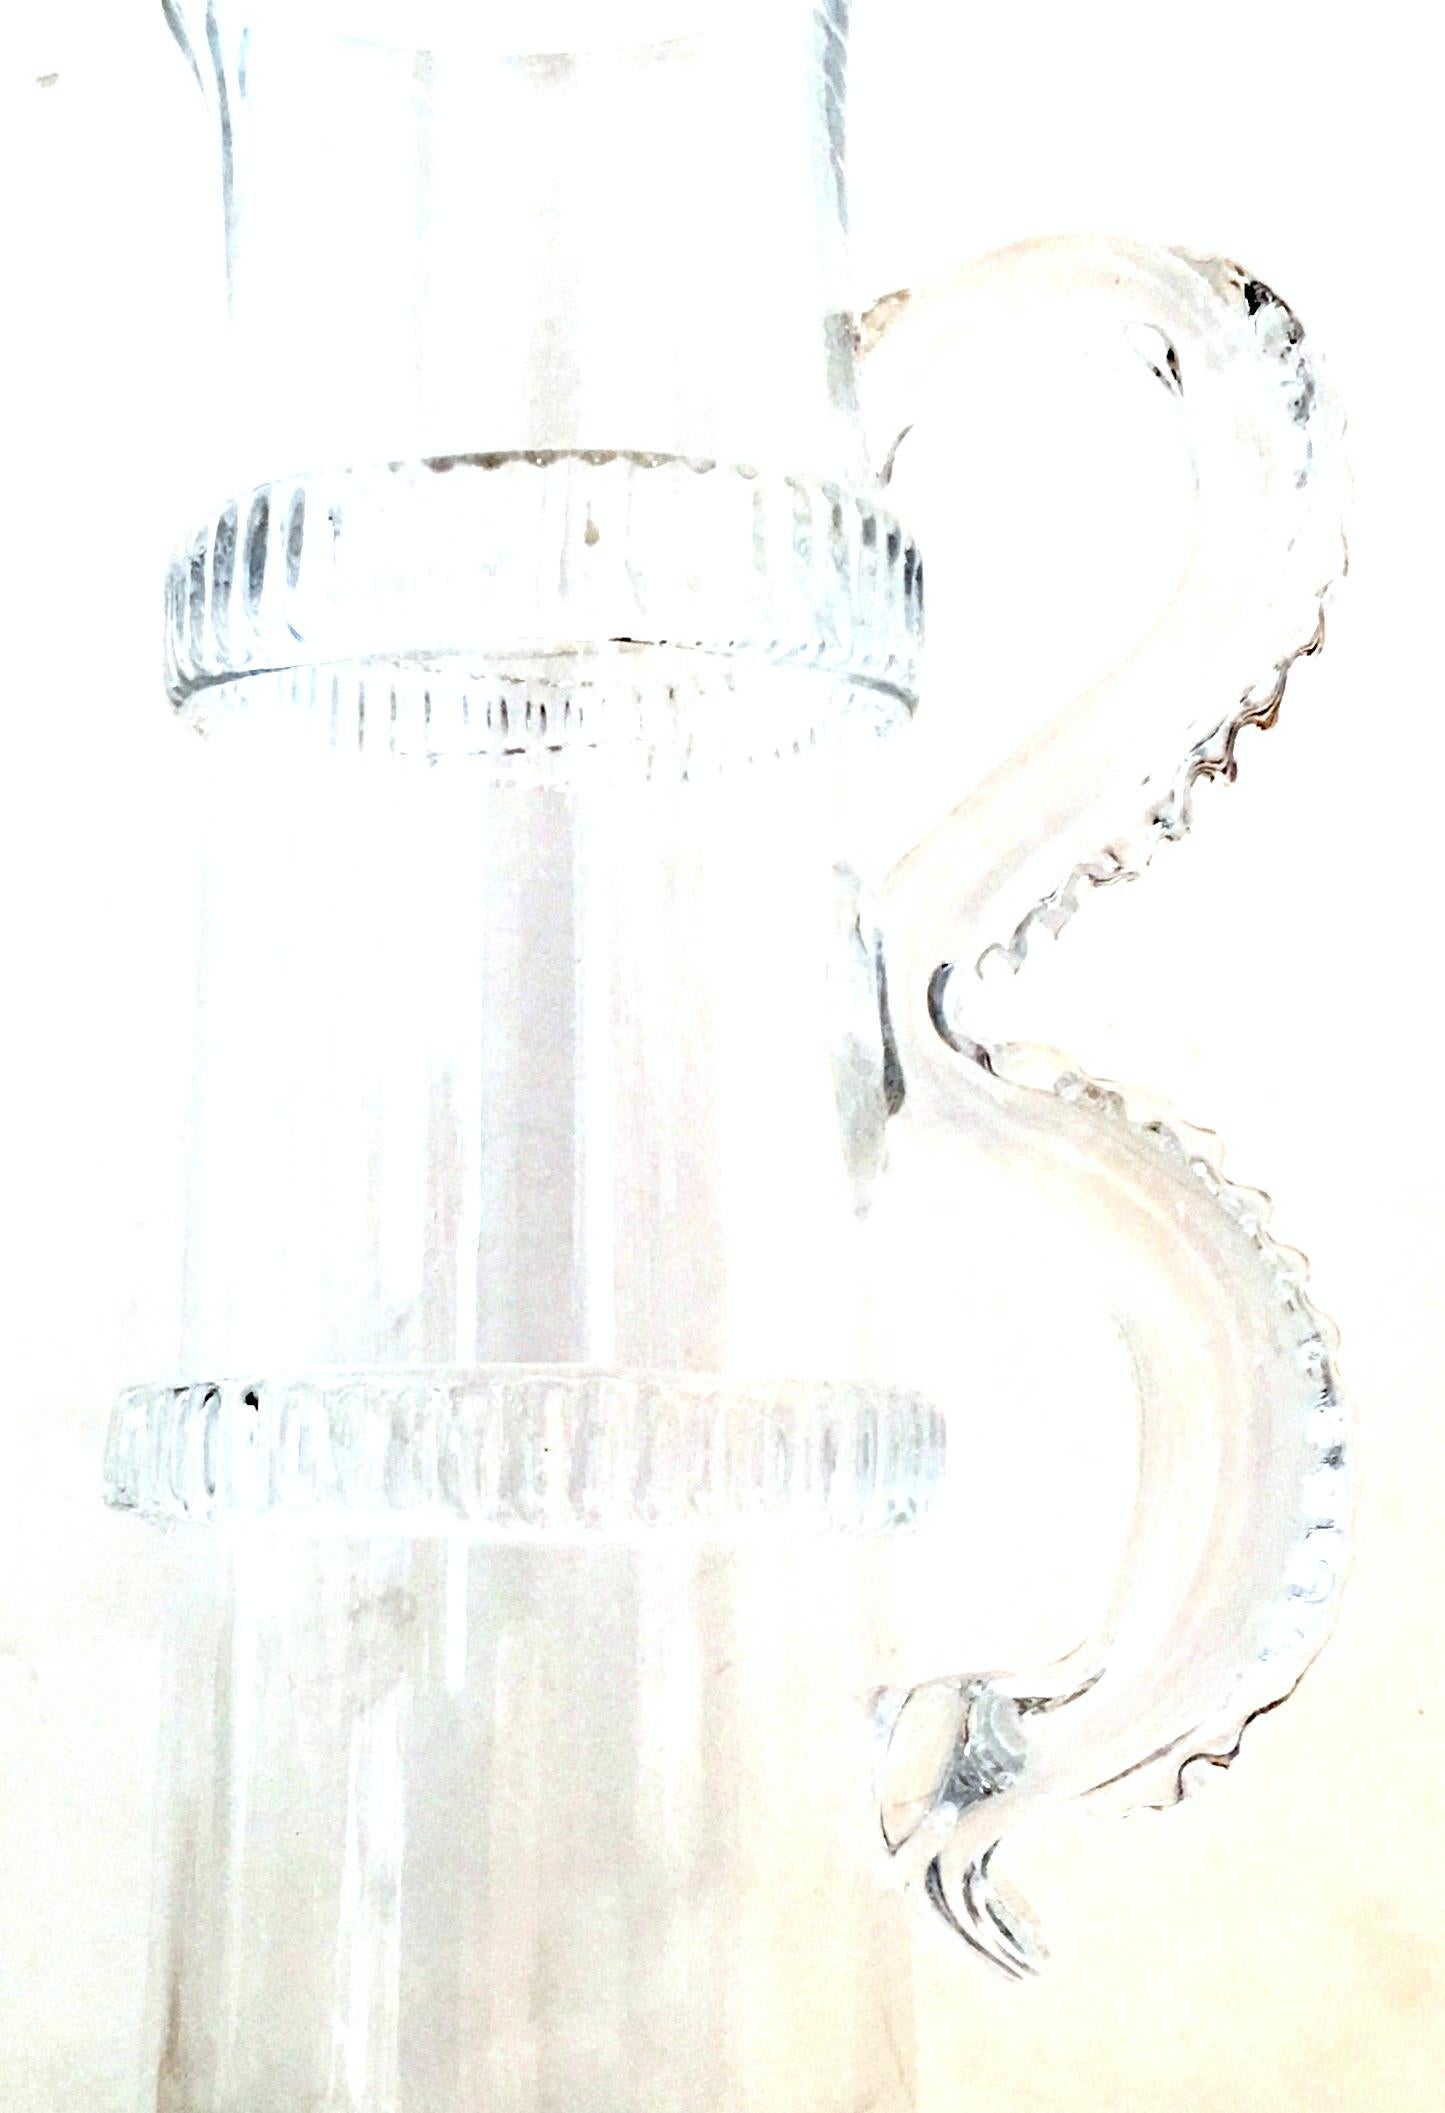 European 21st Century Contemporary Crystal Faux Bamboo Motif Handled Beverage Pitcher For Sale